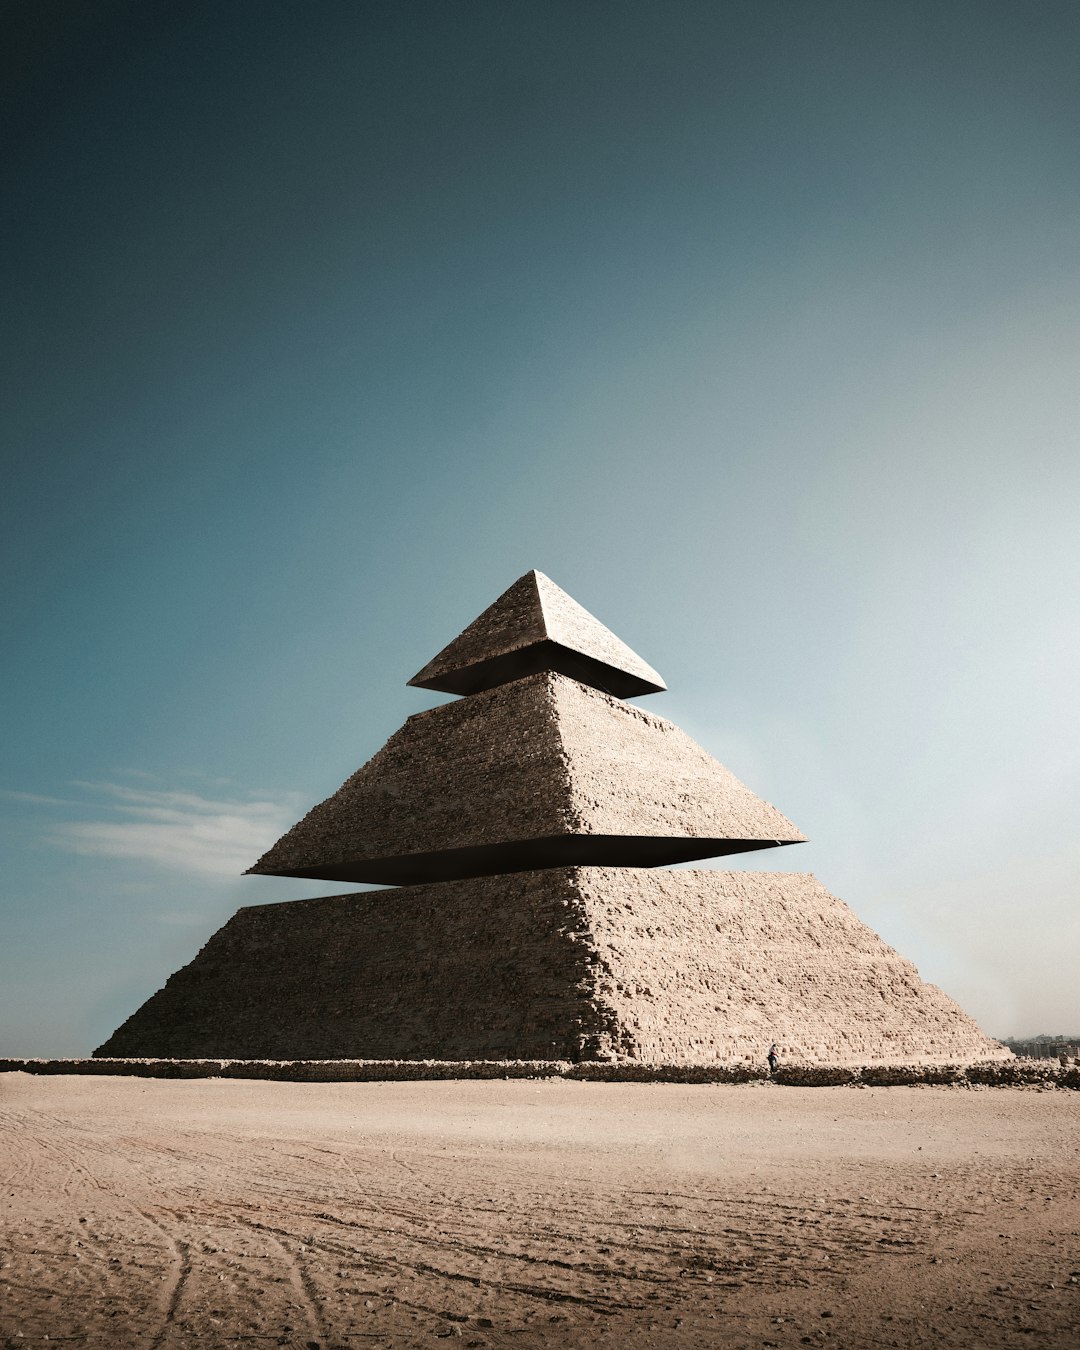 Why it is dangerous to believe aliens built the pyramids